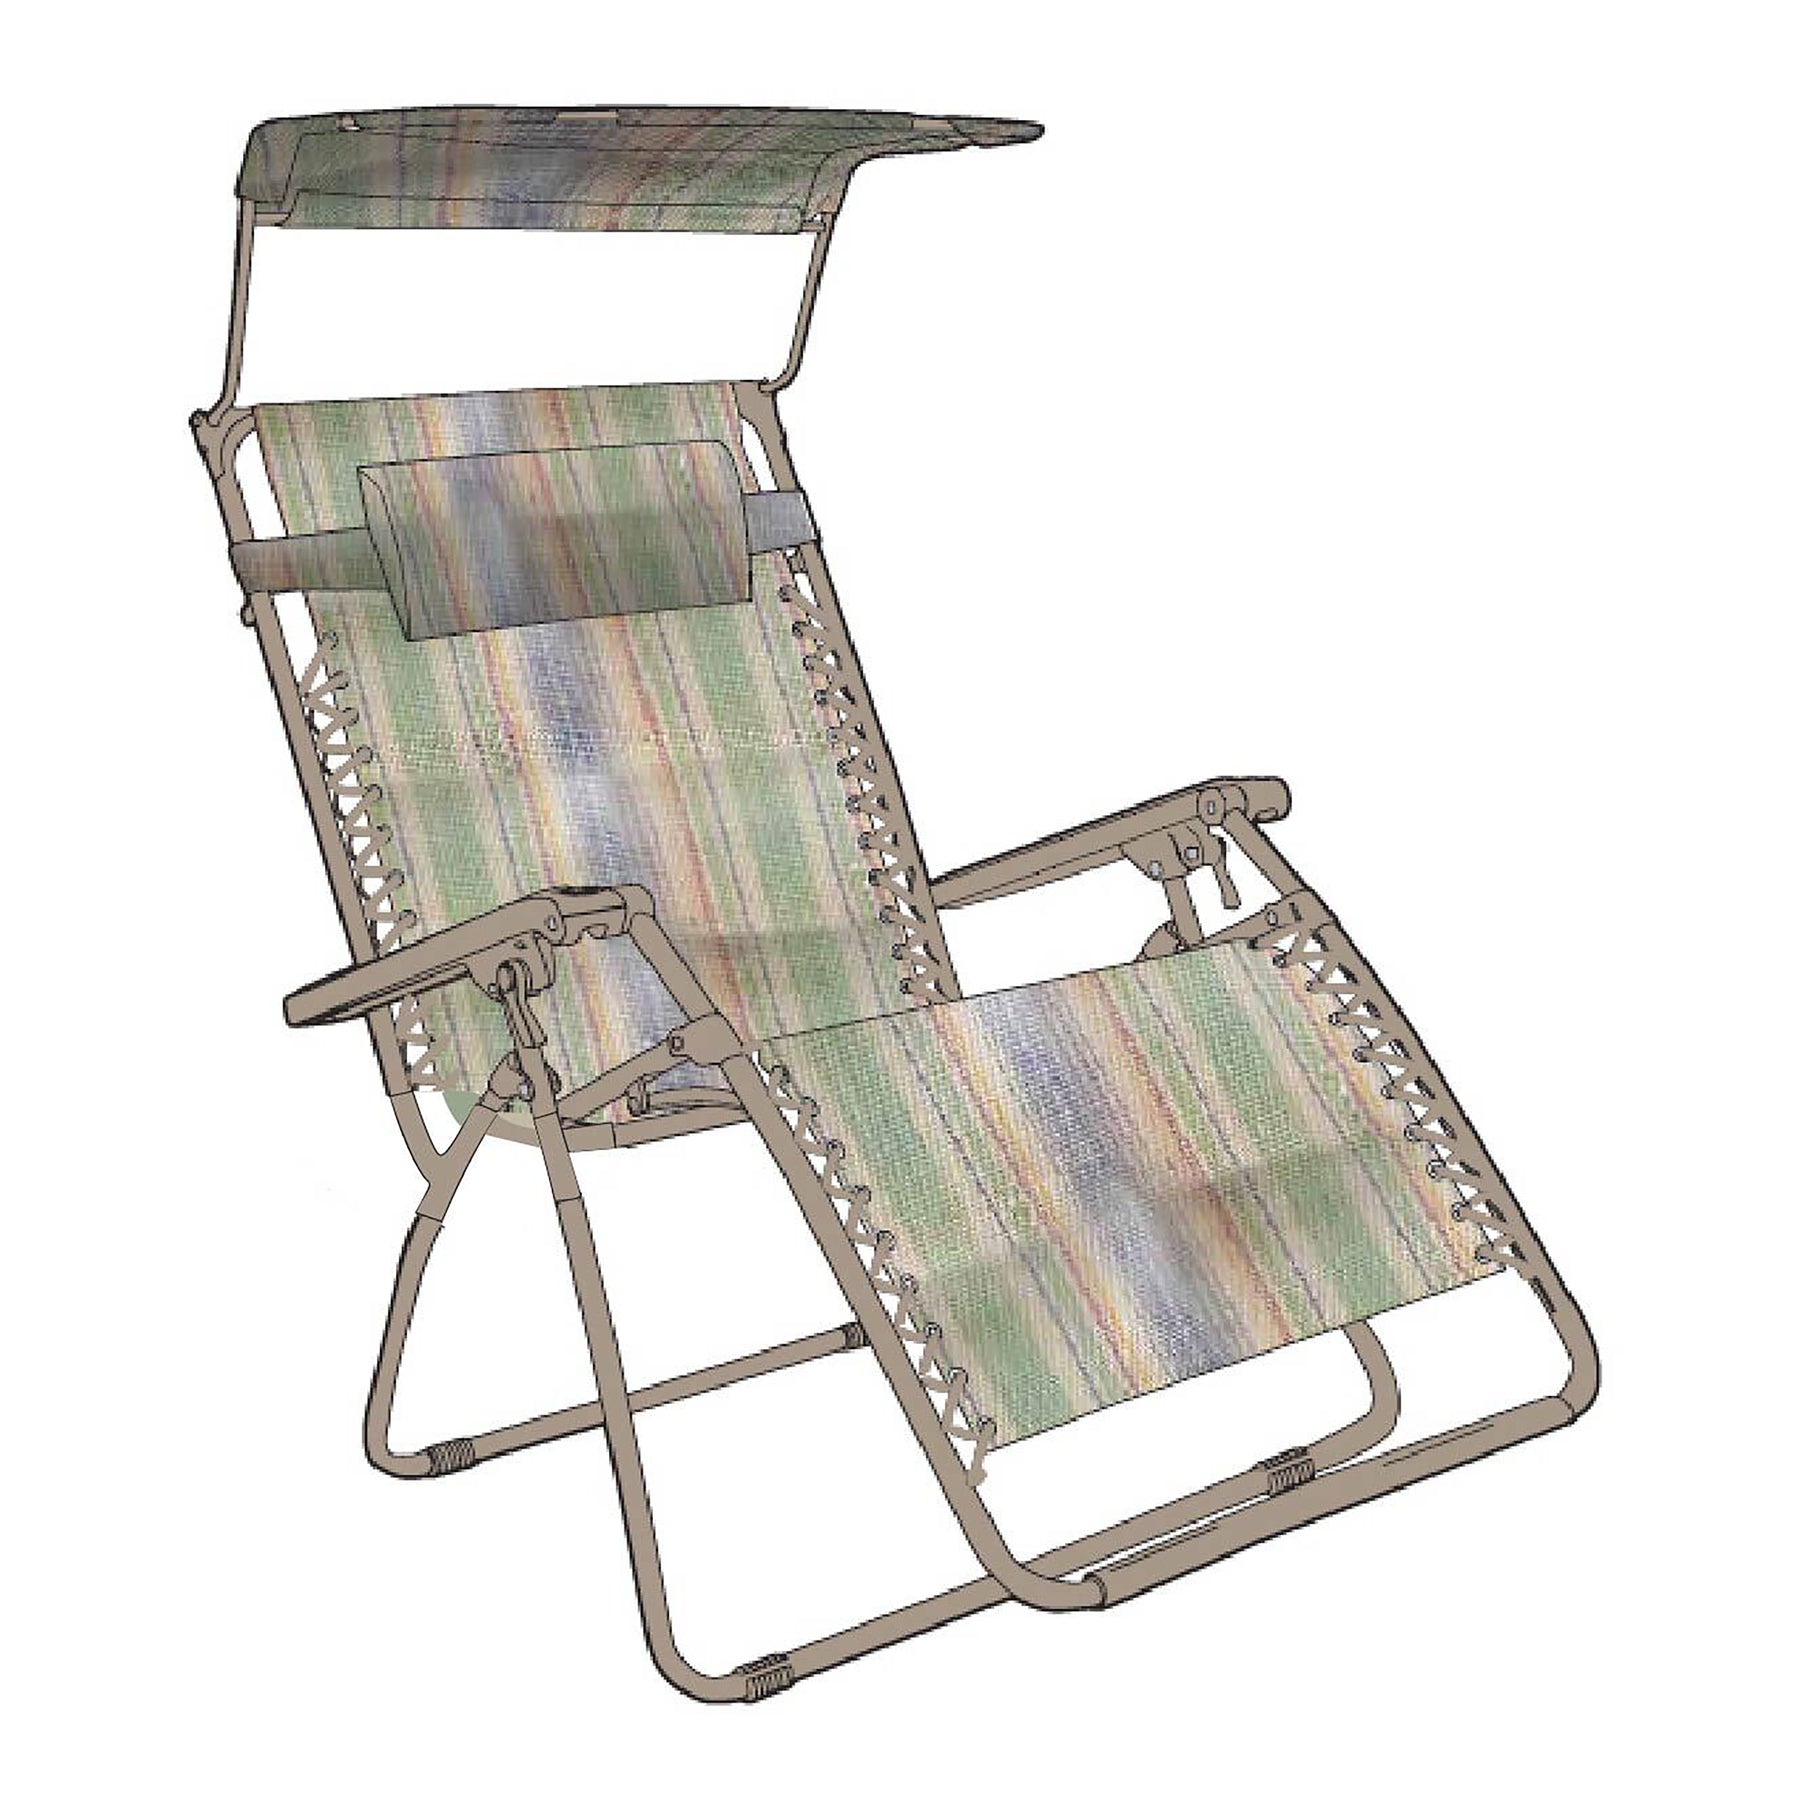 Bliss Hammocks 30-inch Wide XL Zero Gravity Chair with Canopy in the multi-stripe variation.